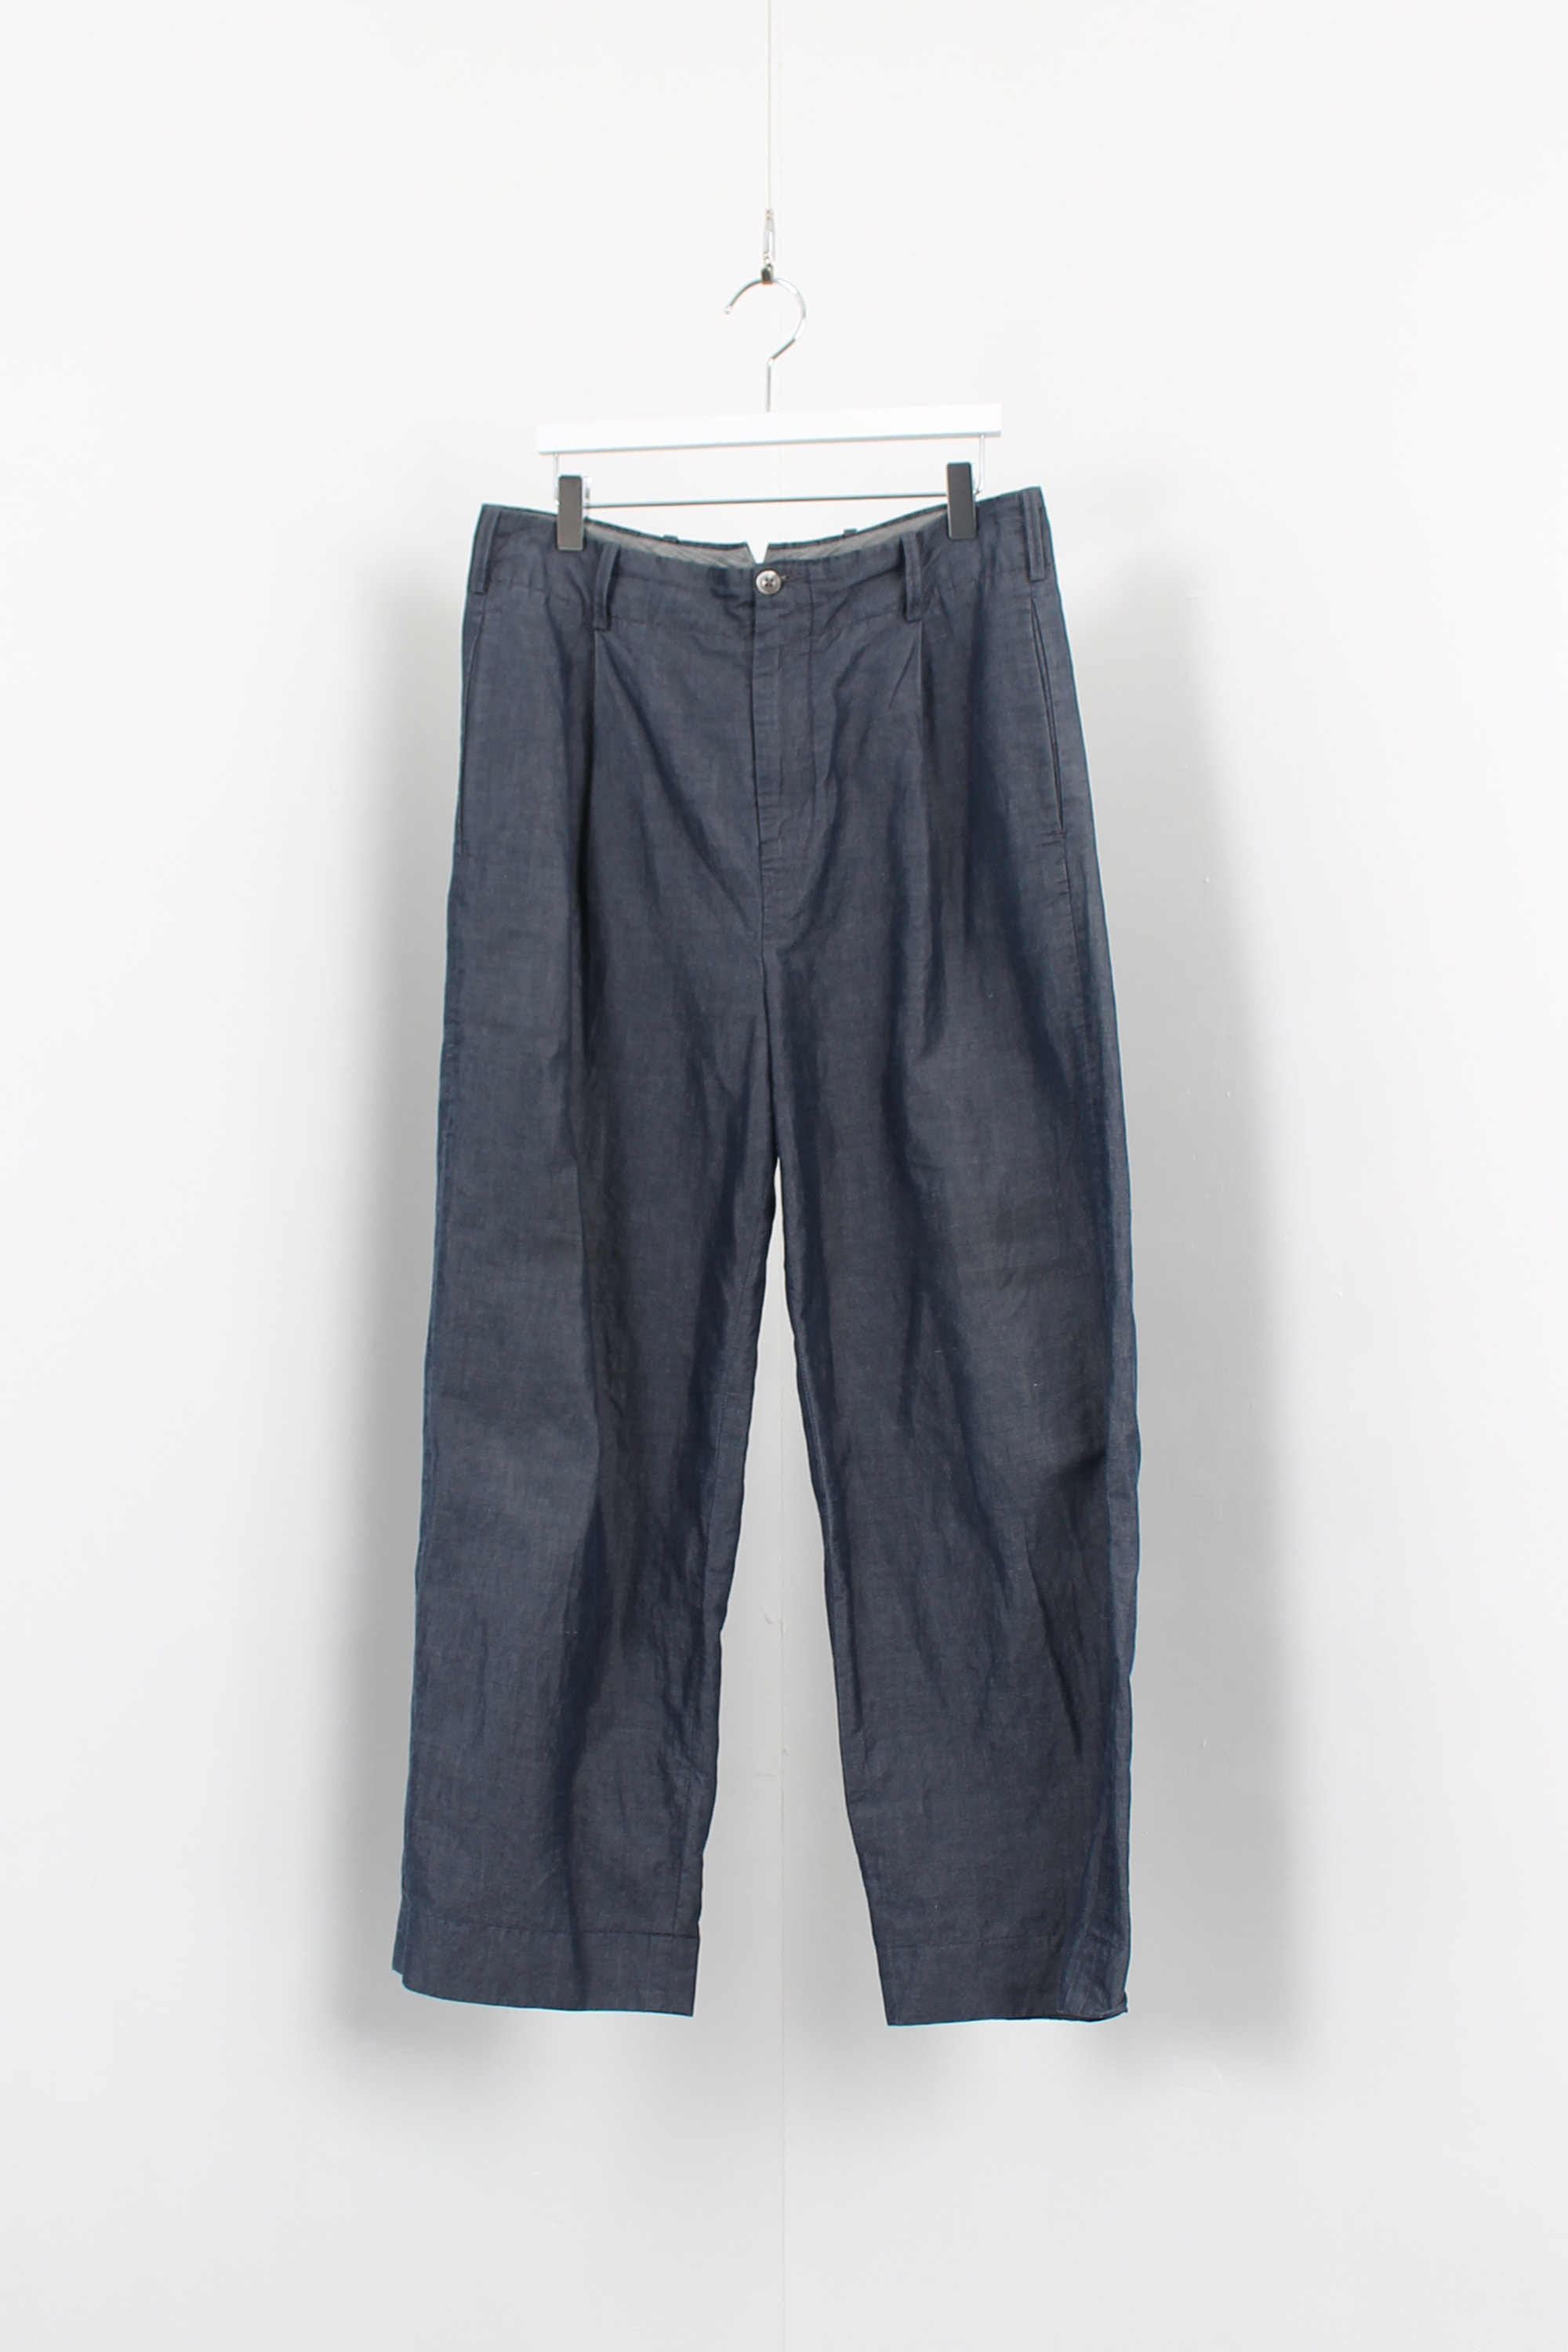 45rpm one tuck wide pants